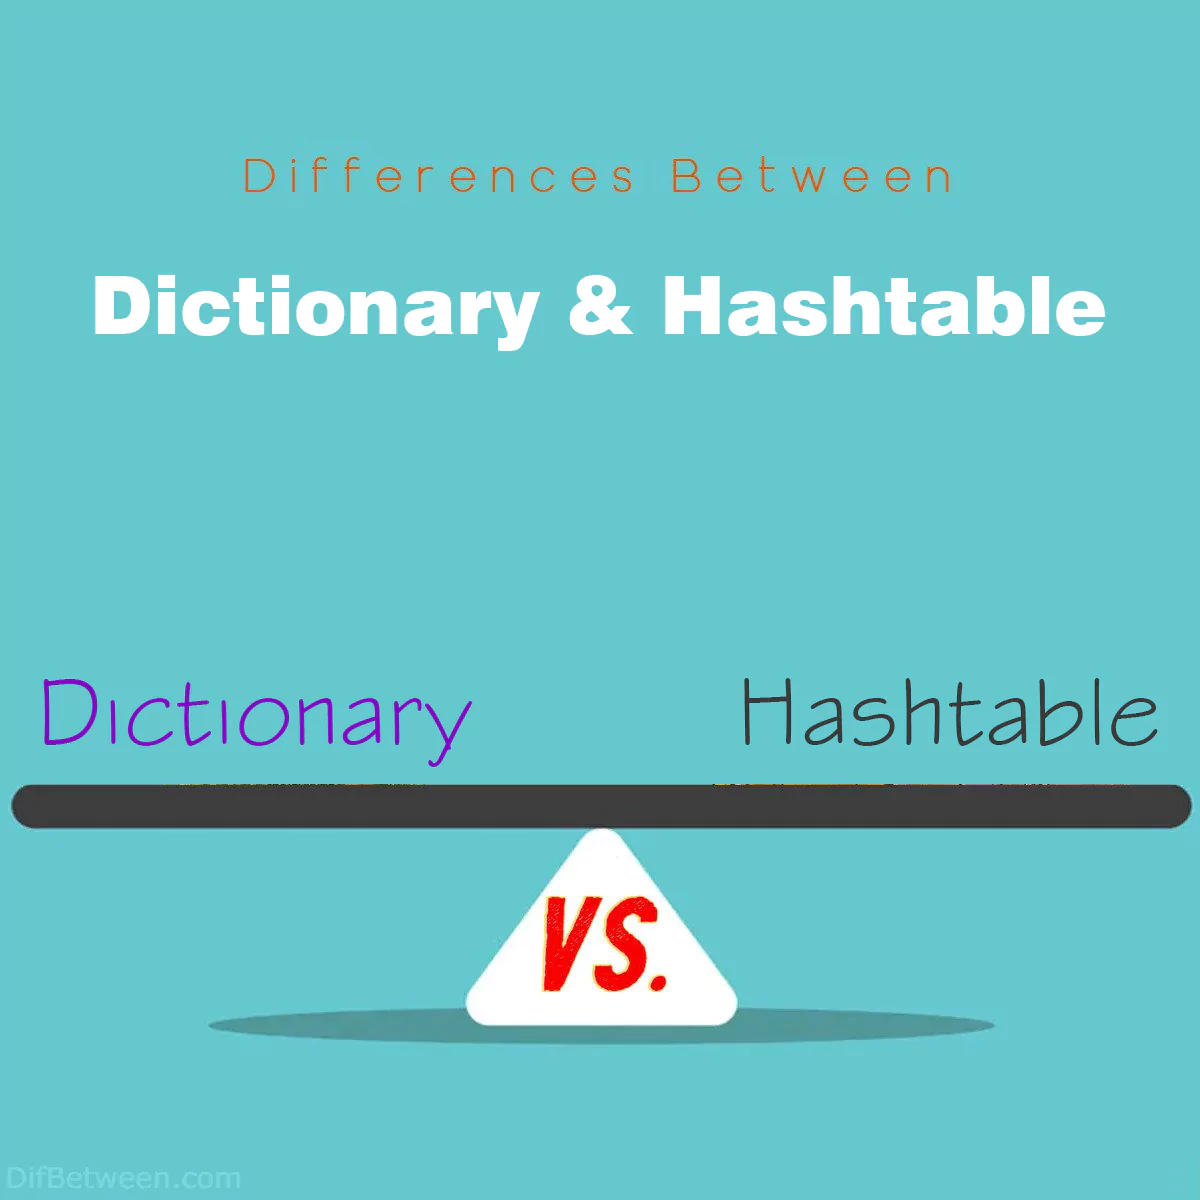 Differences Between Dictionary and Hashtable